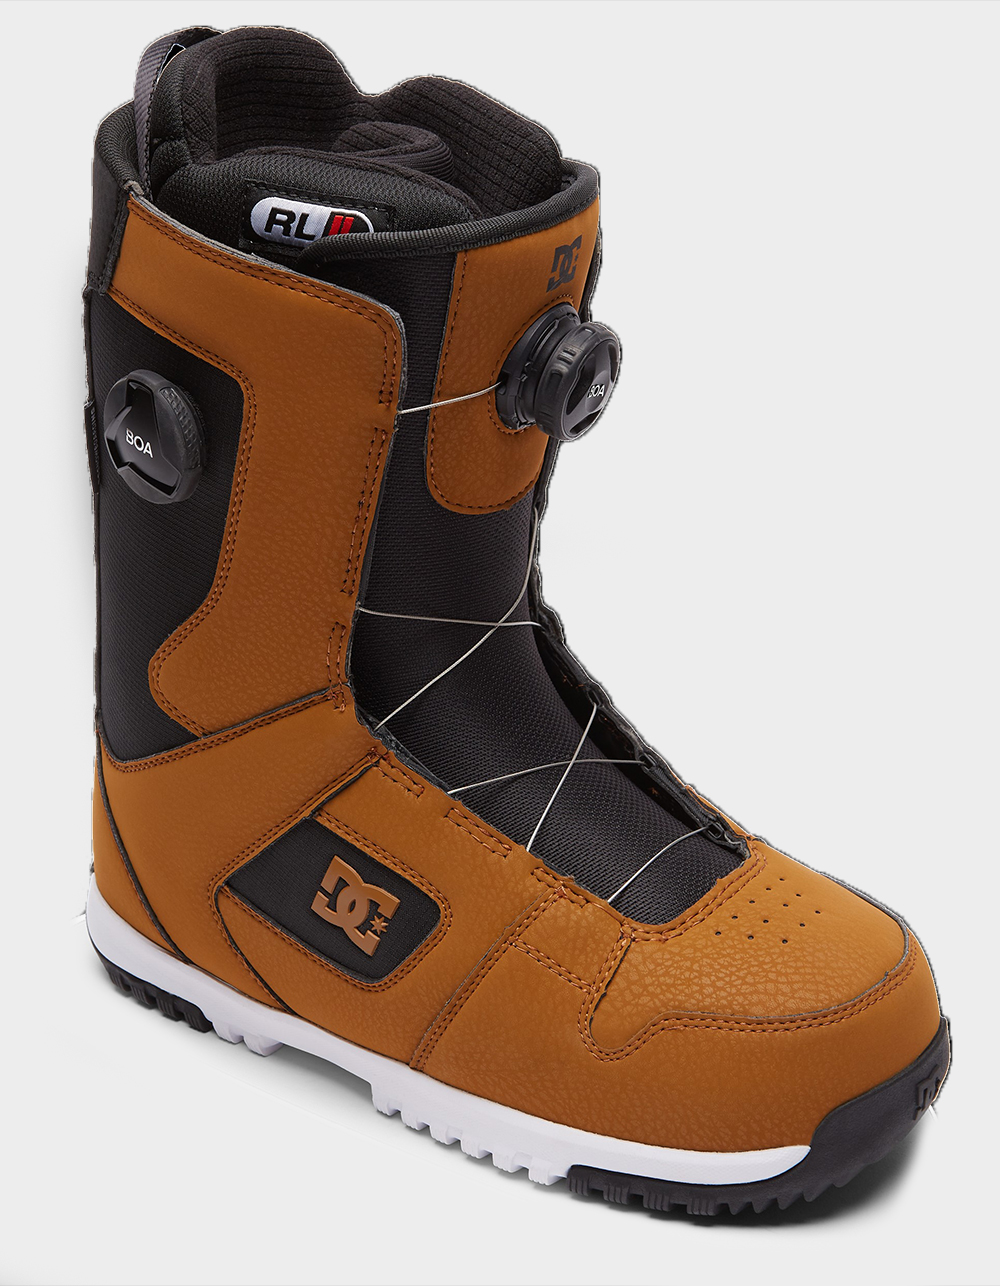 DC SHOES Phase Boa Pro Mens Snowboard Boots